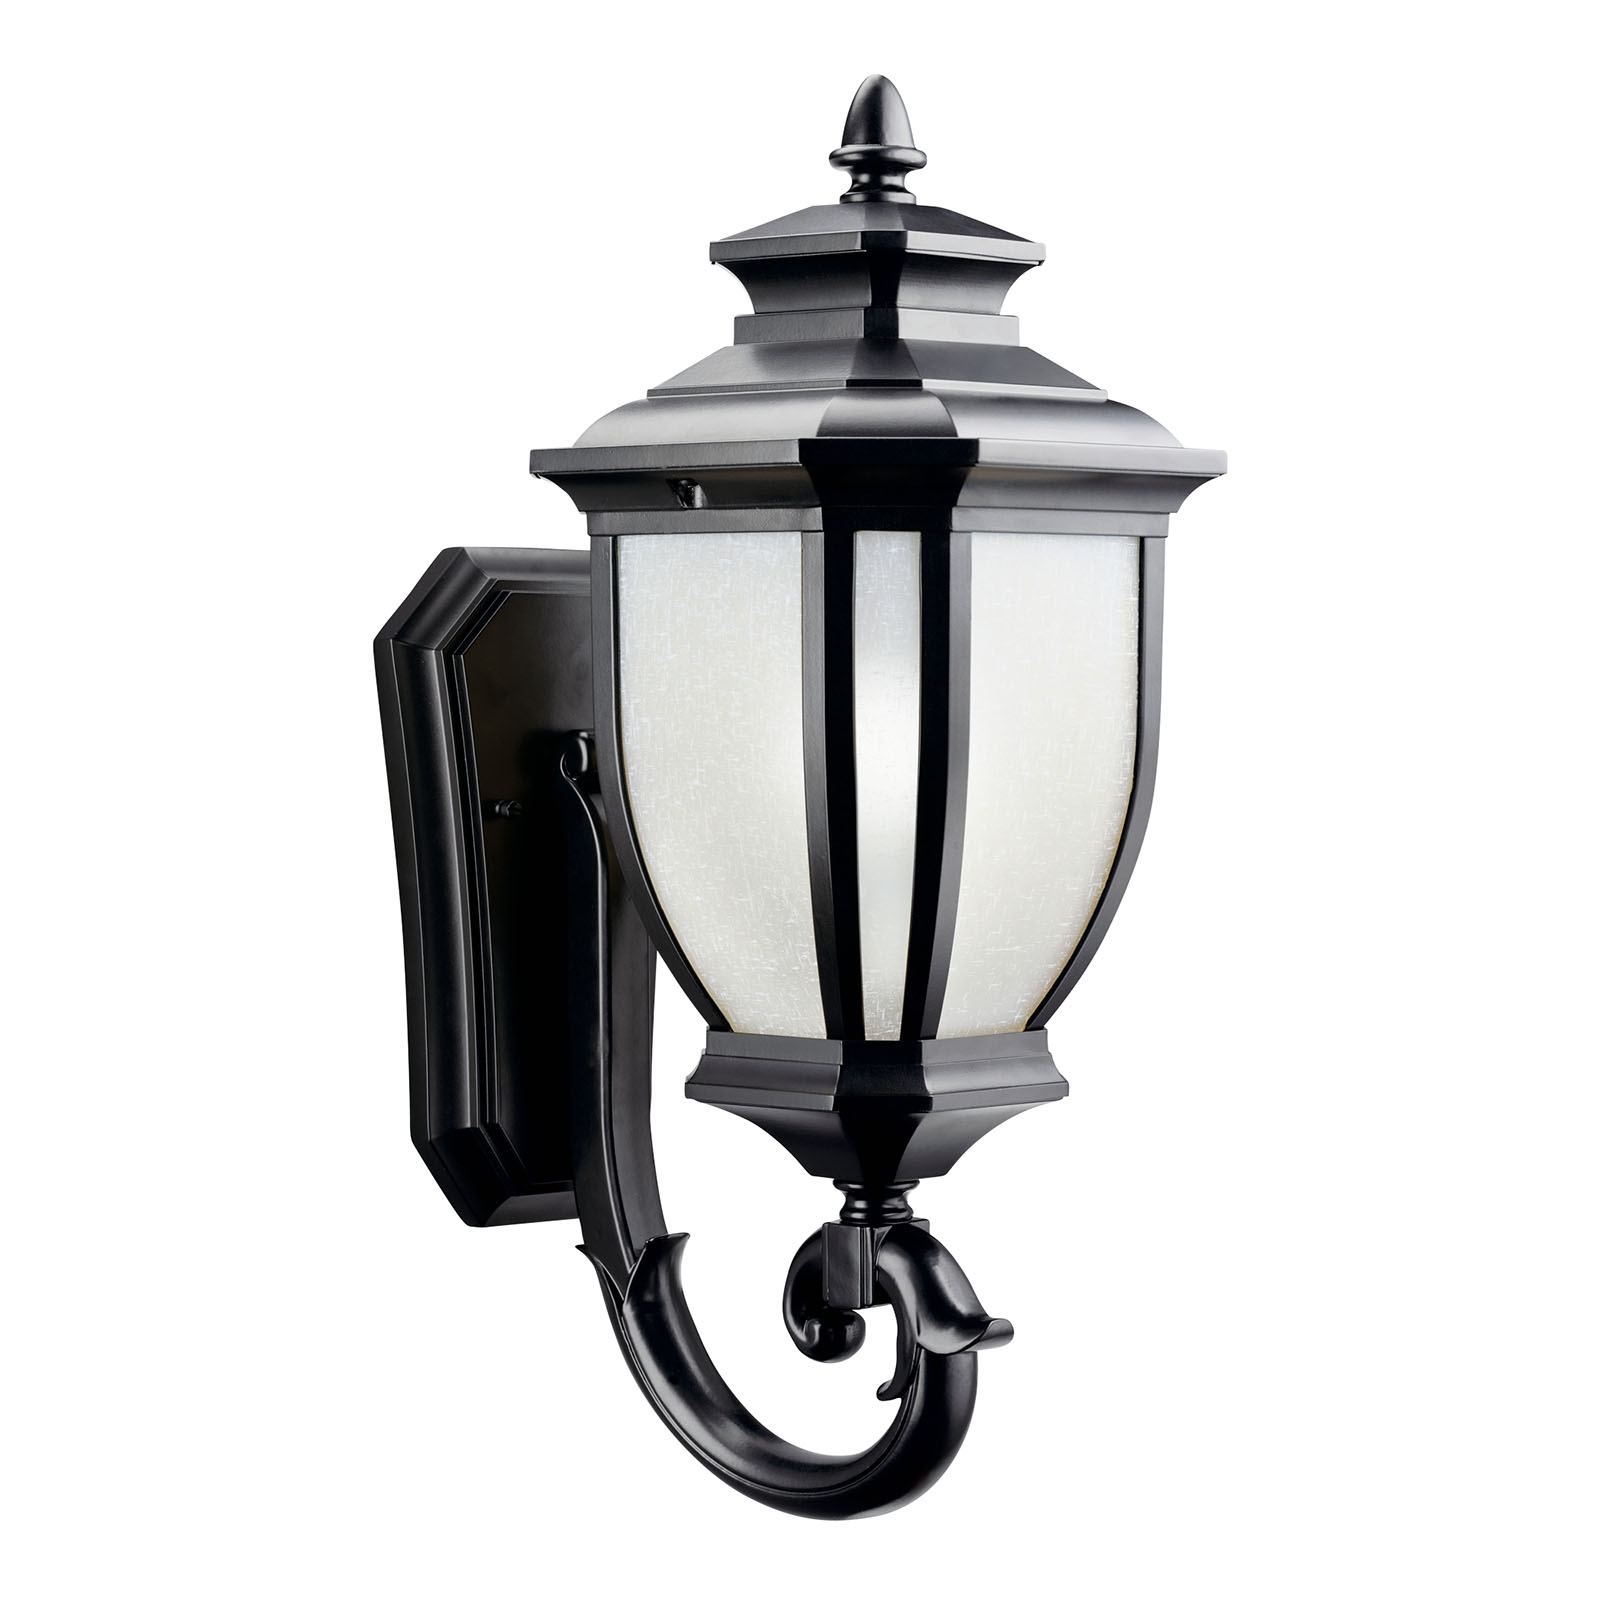 With an unmistakable British influence, this 1 light wall lantern from the elegant Salisbury(TM) collection projects timeless style for exterior spaces. Accented with a classic Black finish and White Linen Glass, this piece is as functional as it is refined.